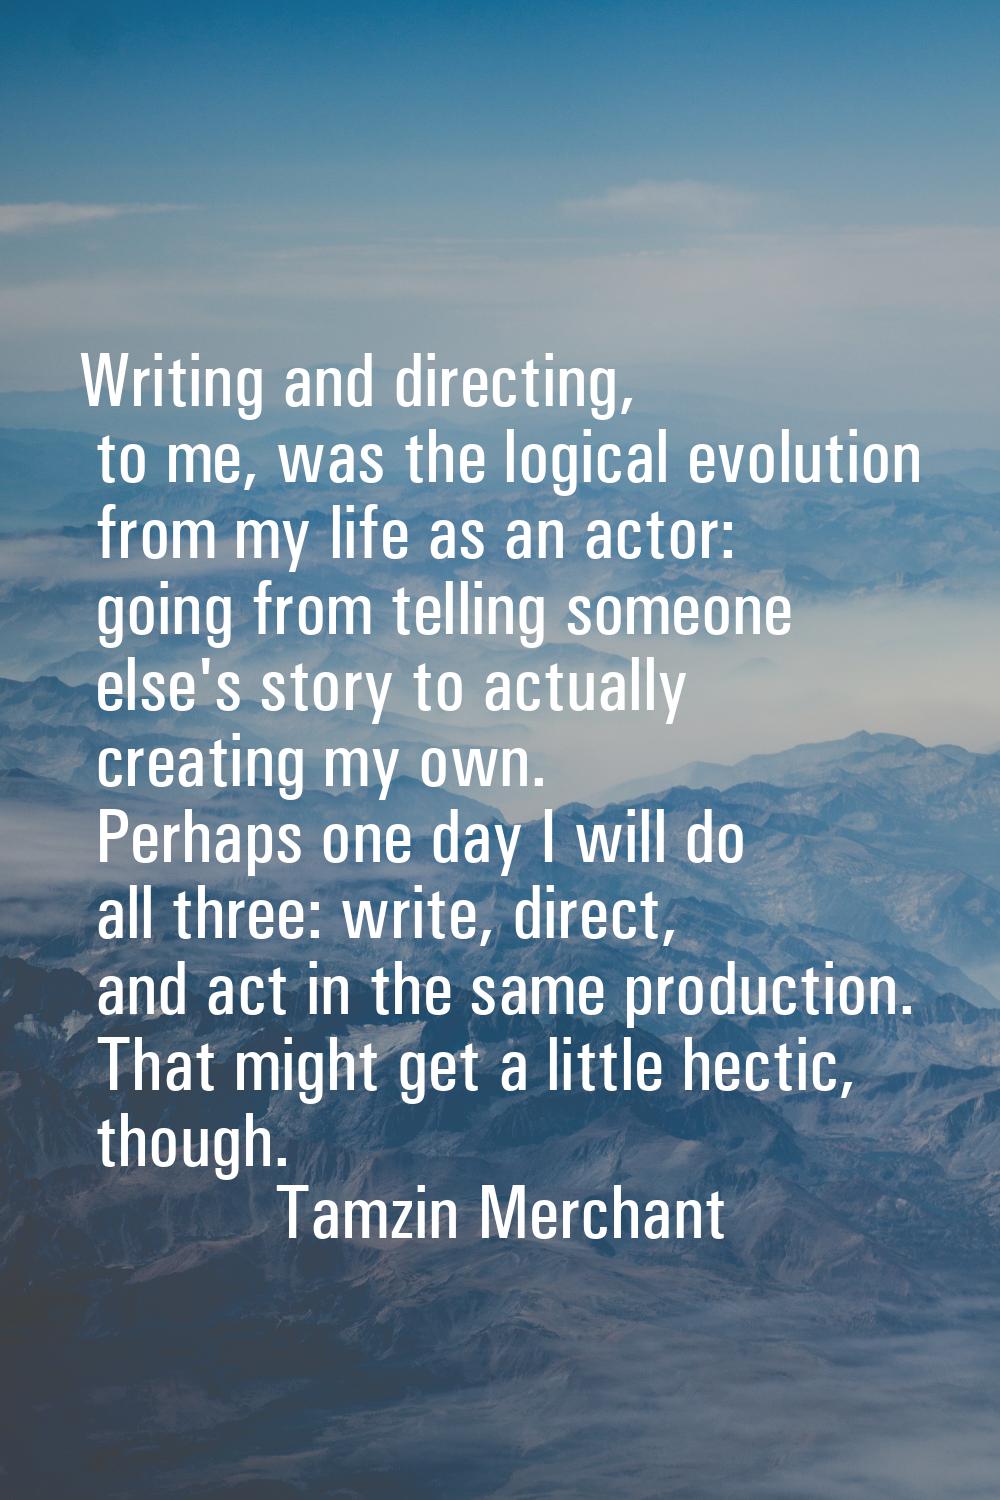 Writing and directing, to me, was the logical evolution from my life as an actor: going from tellin